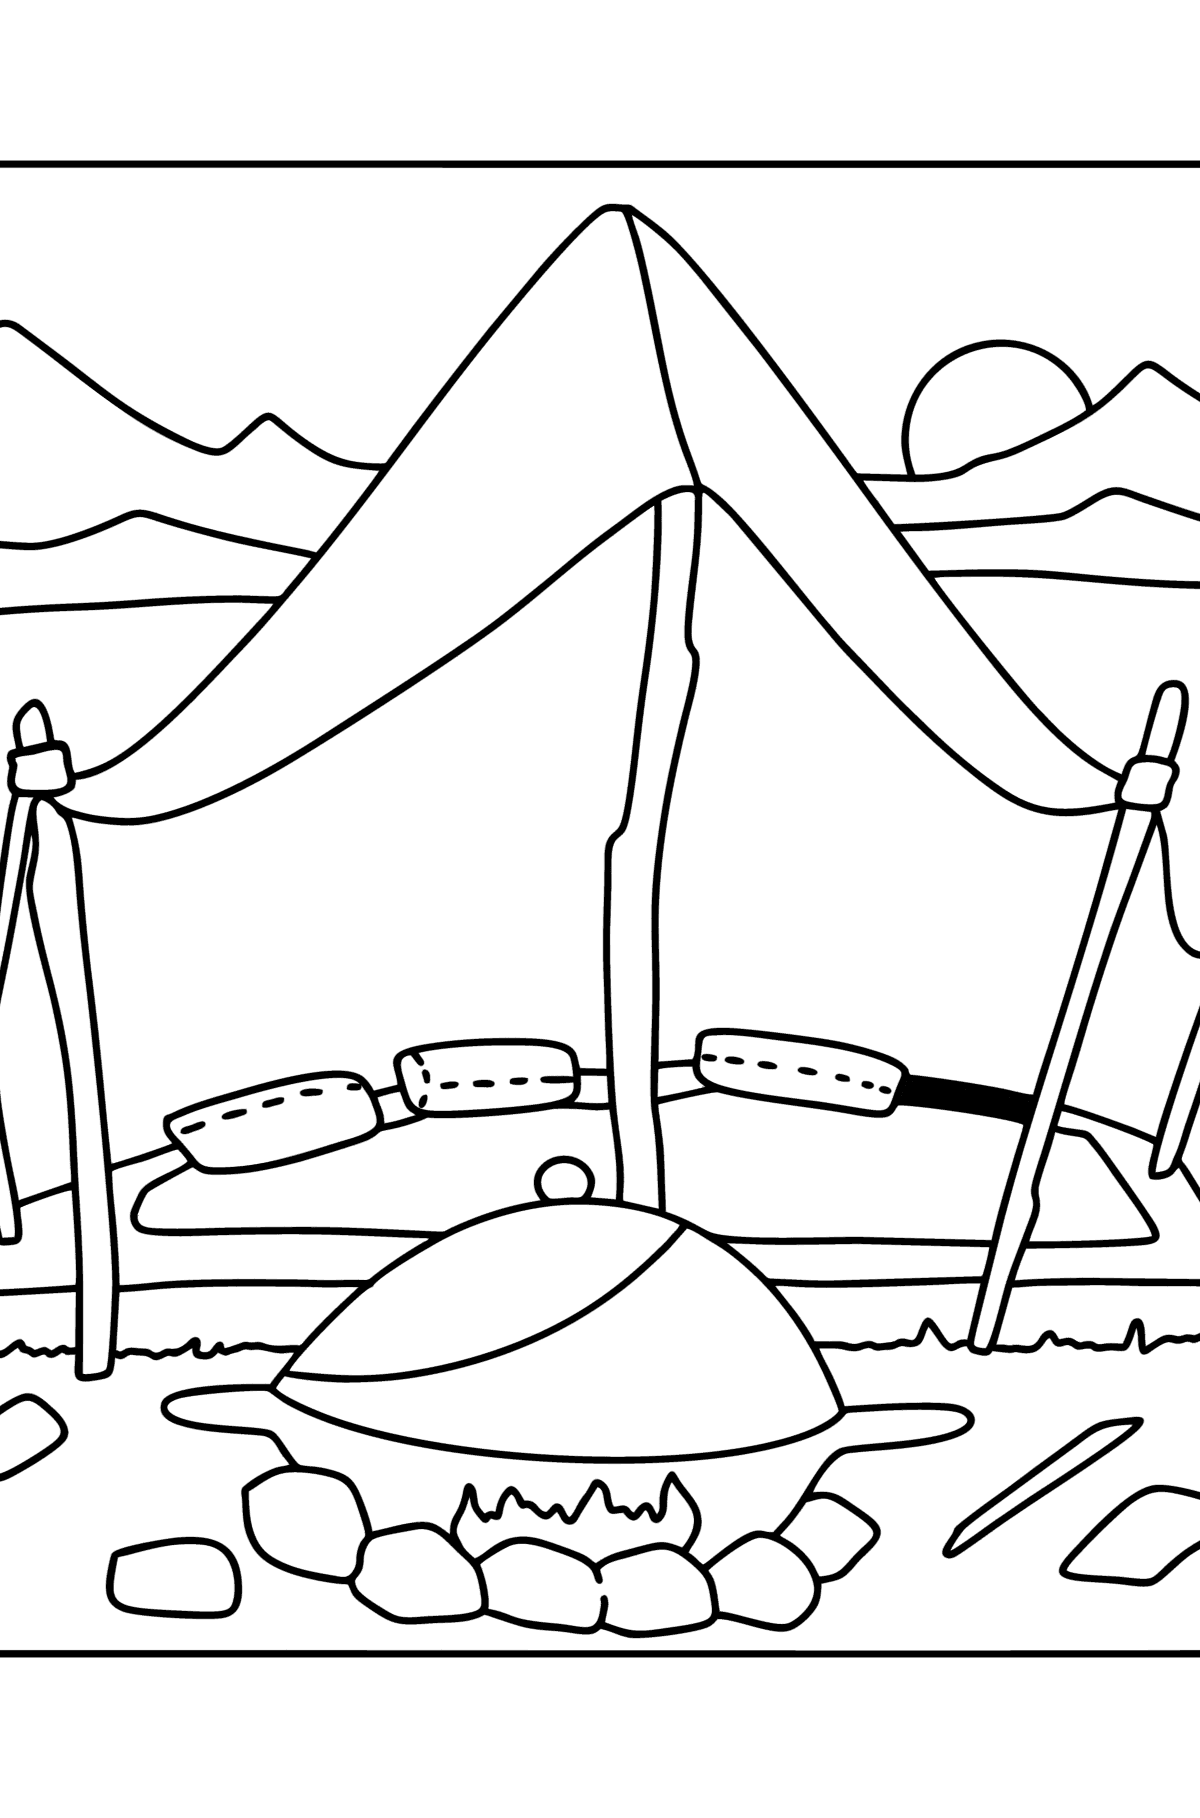 Bedouin tent coloring page - Coloring Pages for Kids